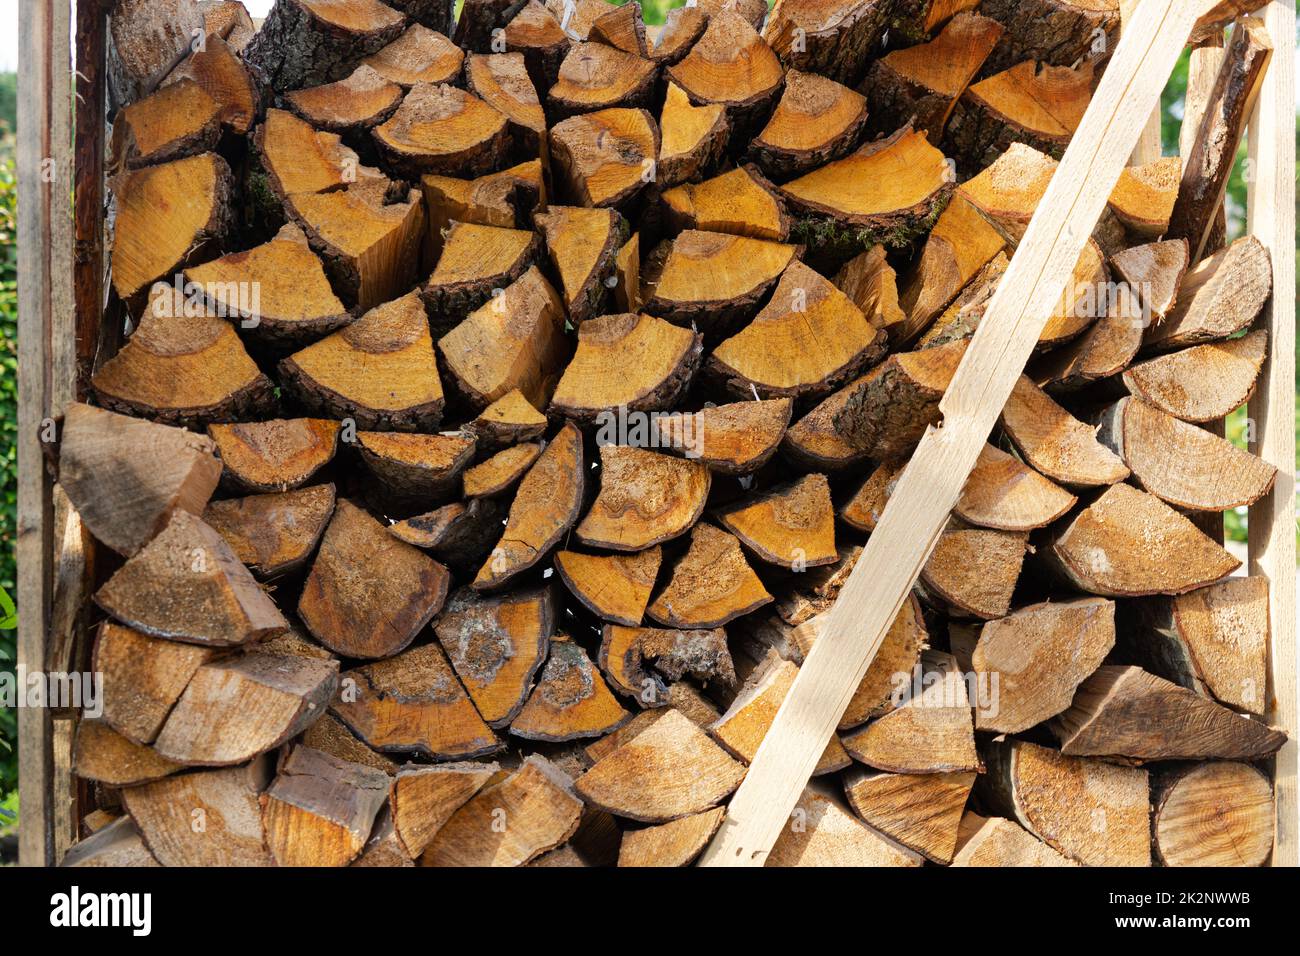 Heating with wood: Building a winter stockpile of firewood Stock Photo